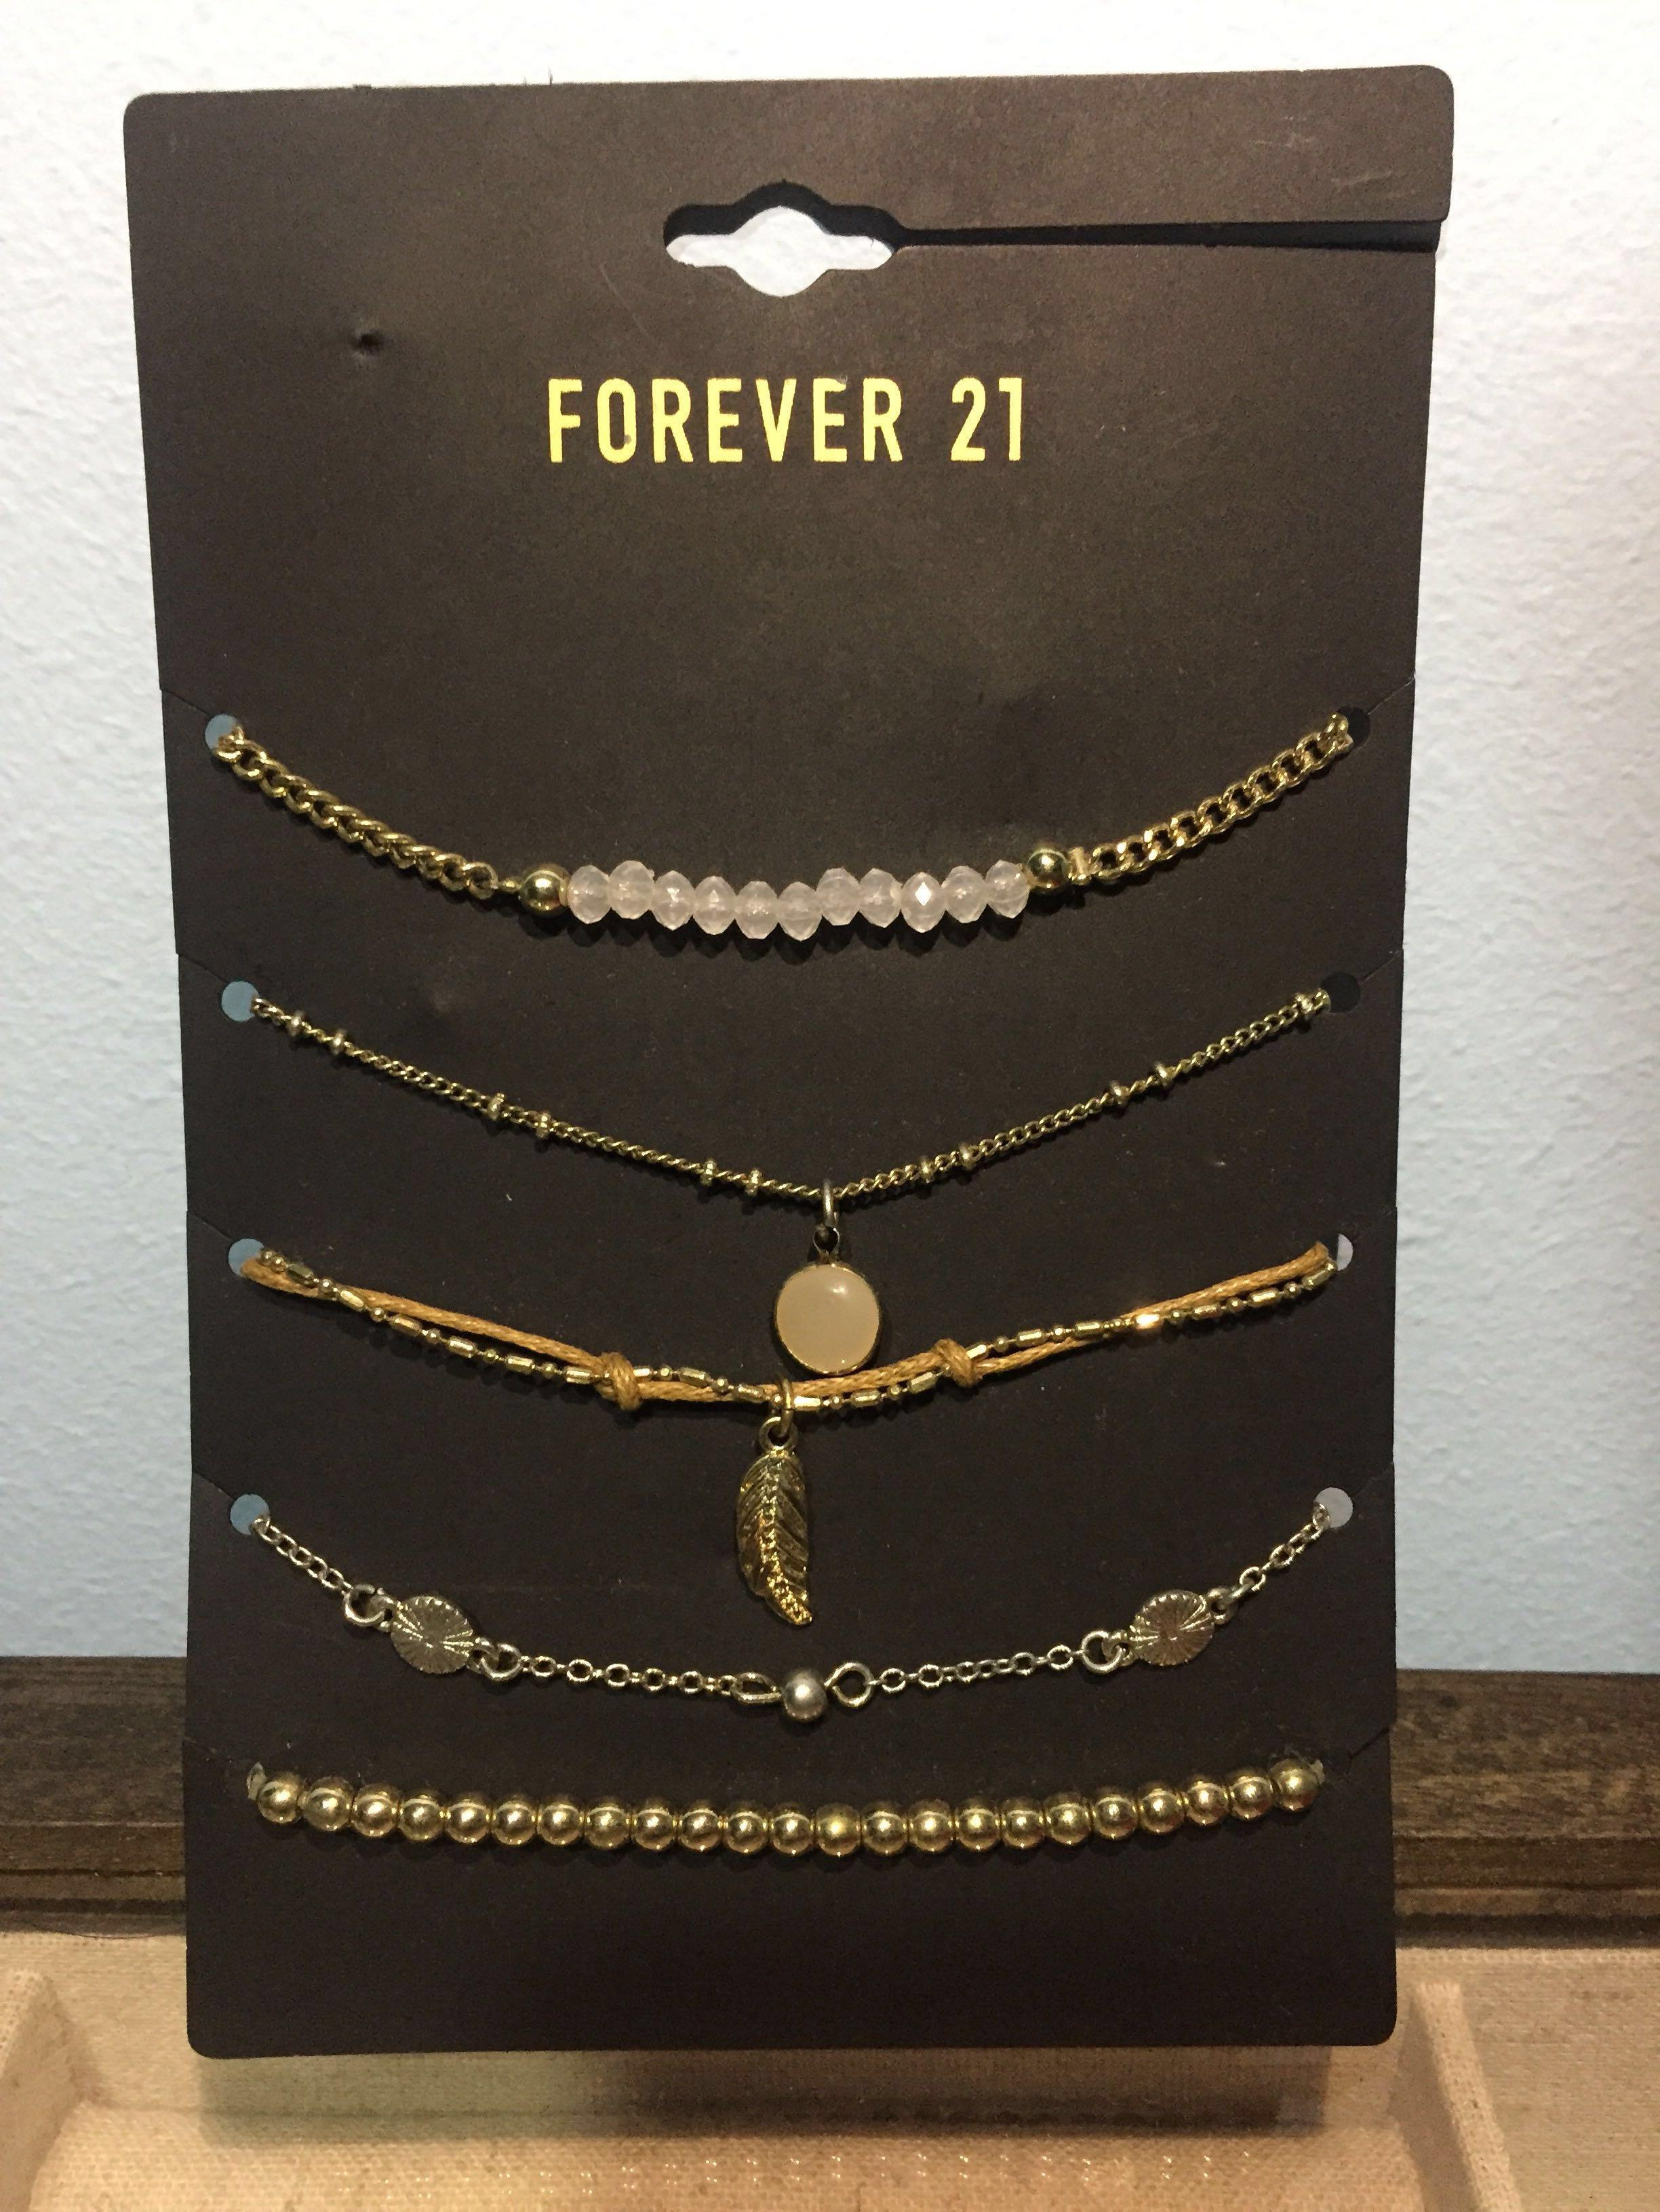 A Cynful Fiction: Jewelry/Accessories Haul ~ Forever 21, Accessorize,  Claire's, Forever New, Etc